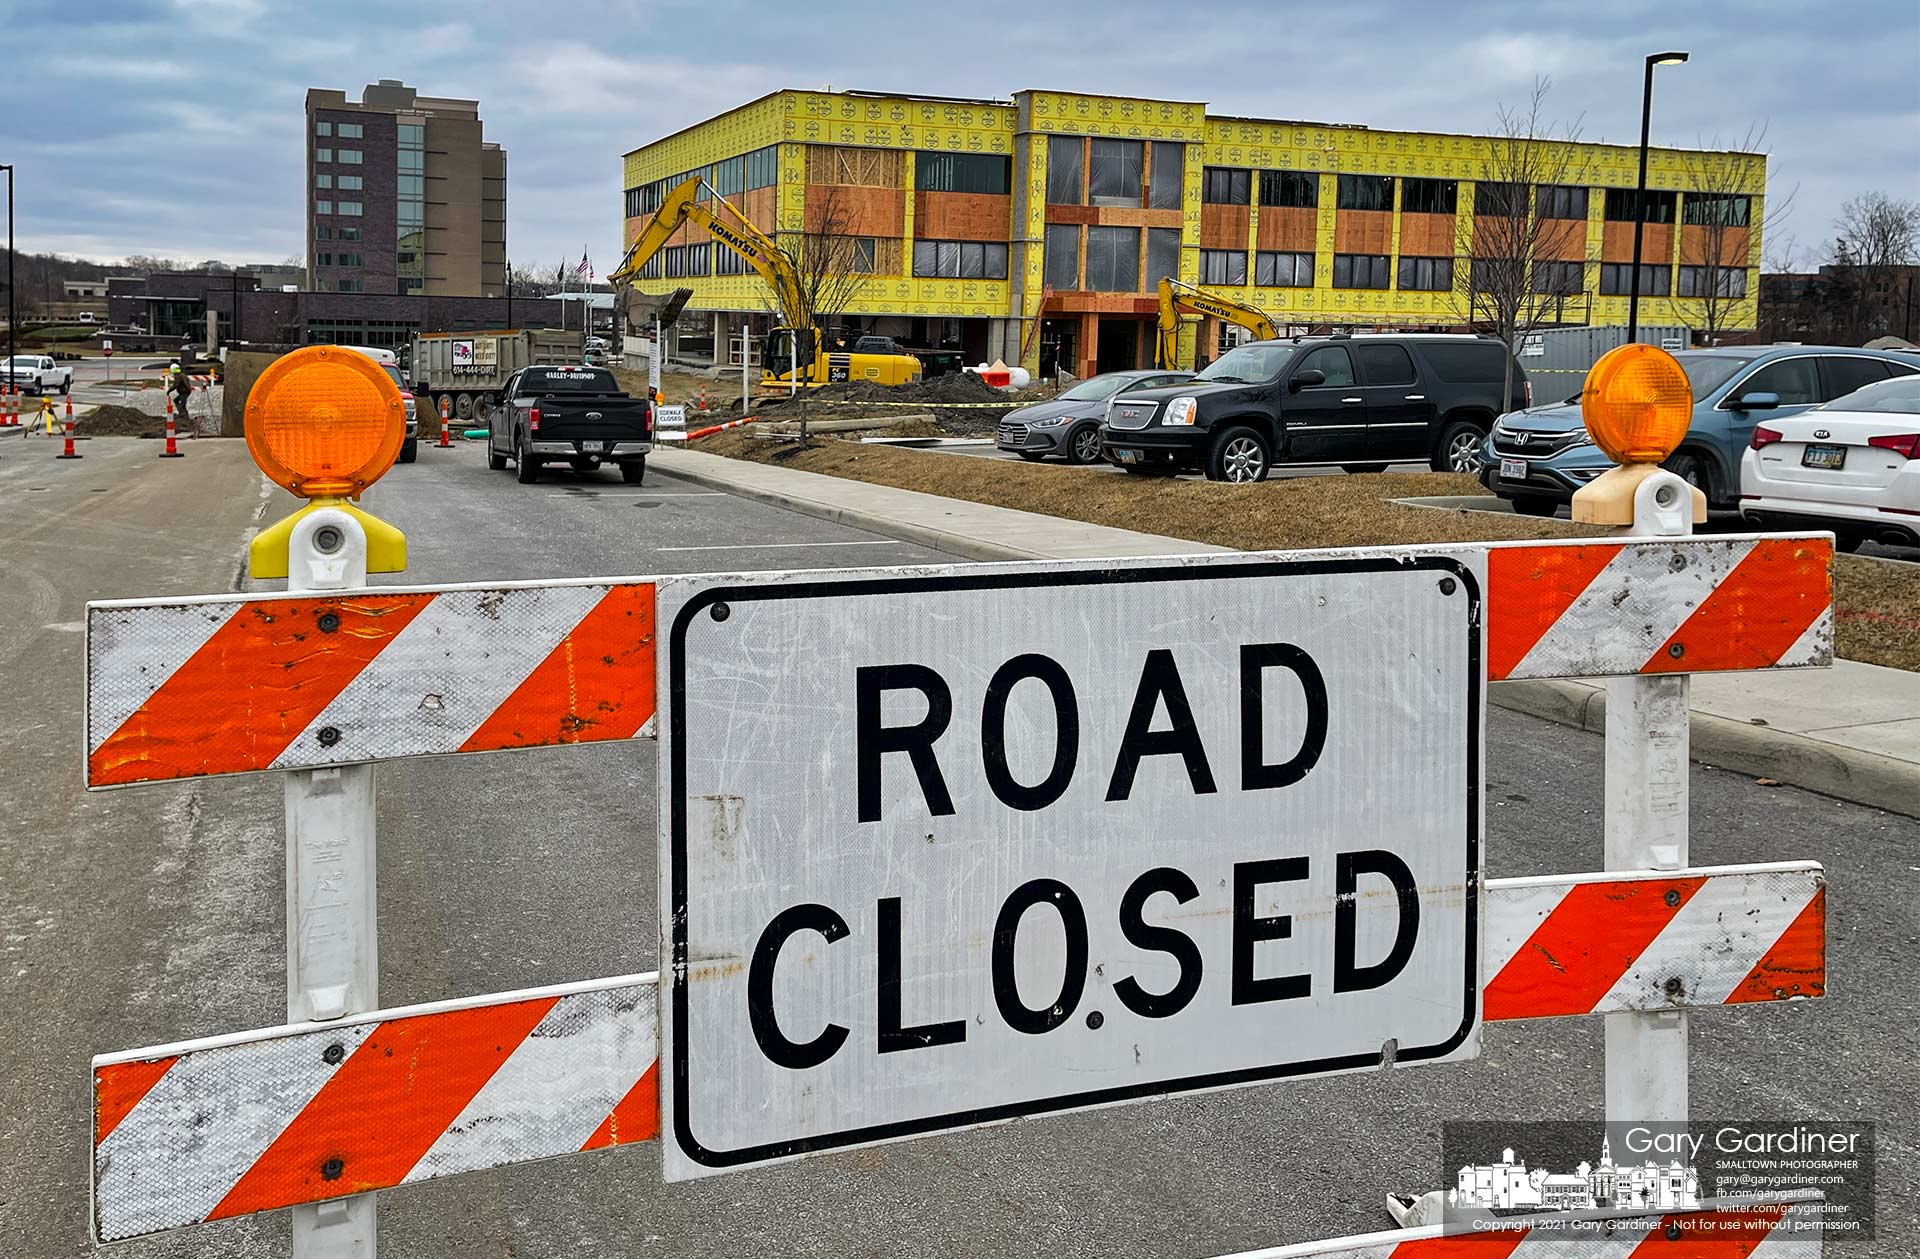 A sign marks a closed section of road between Africa Road and Altair Parkway where contractors are installing a new storm sewer connected to the COPC office under construction nearby. My Final Photo for Jan. 28, 2021.